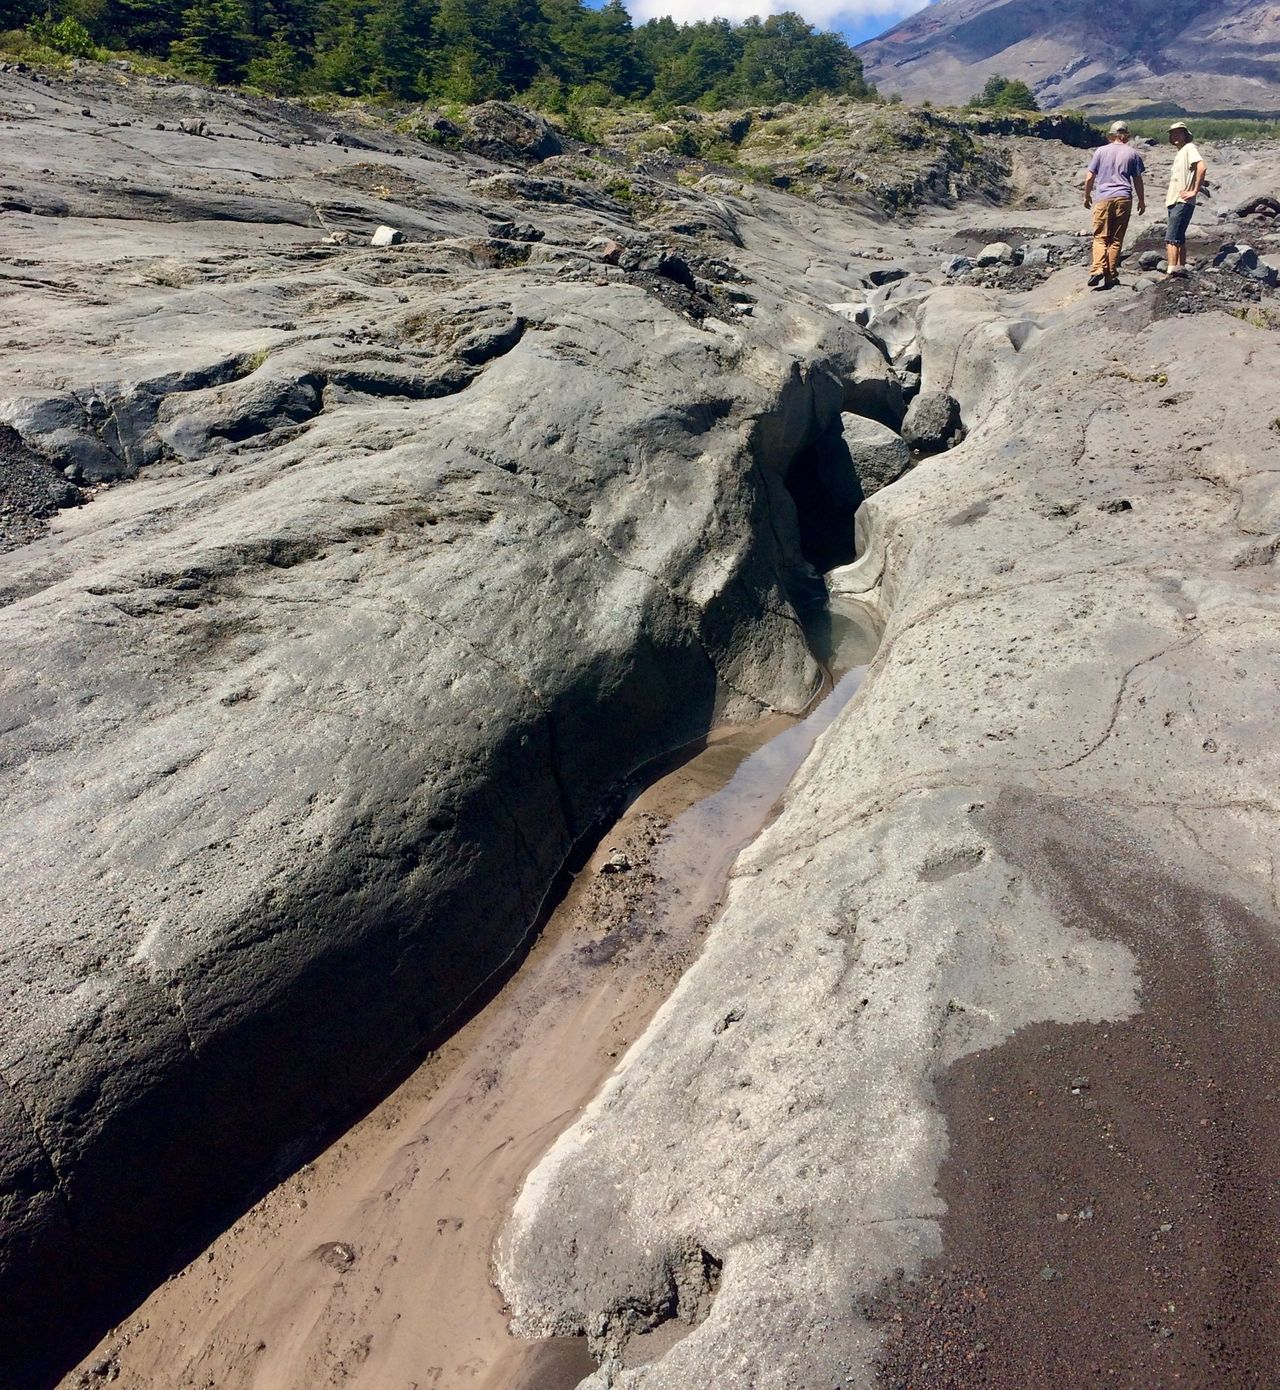 Deep crevice in rocks from water erosion.